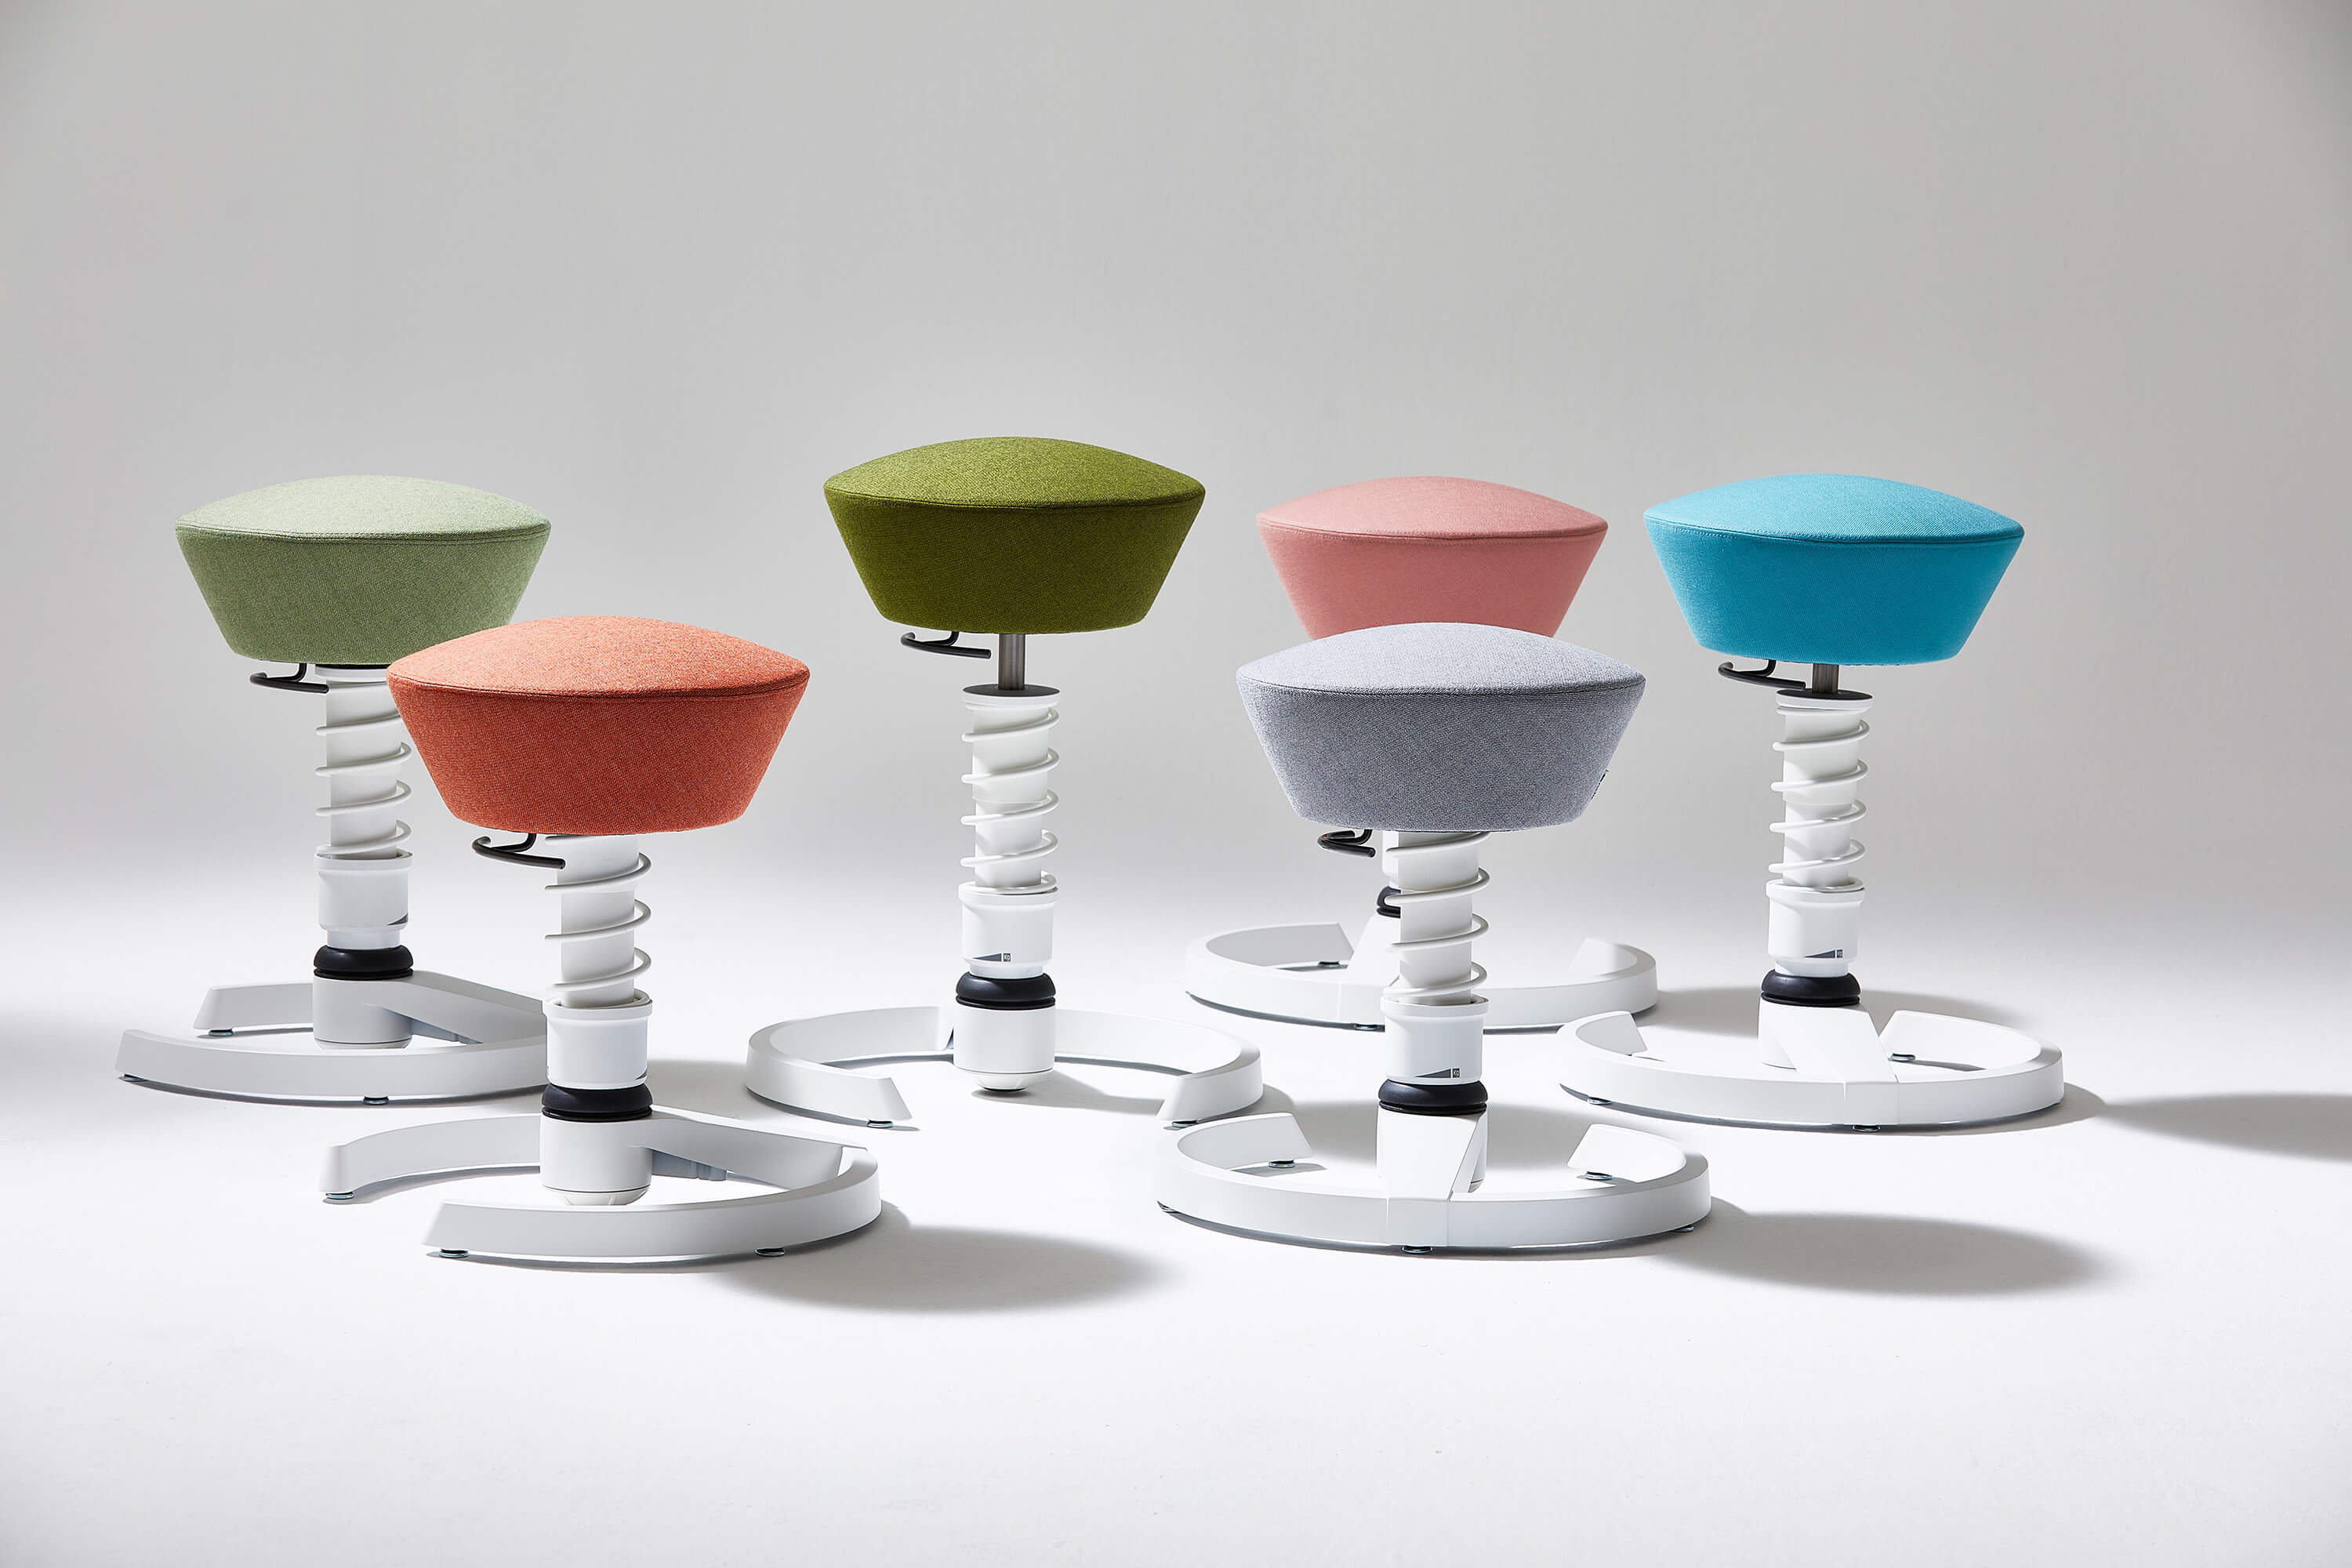 The Aeris Swopper work stool can be customized, its design is unmistakable